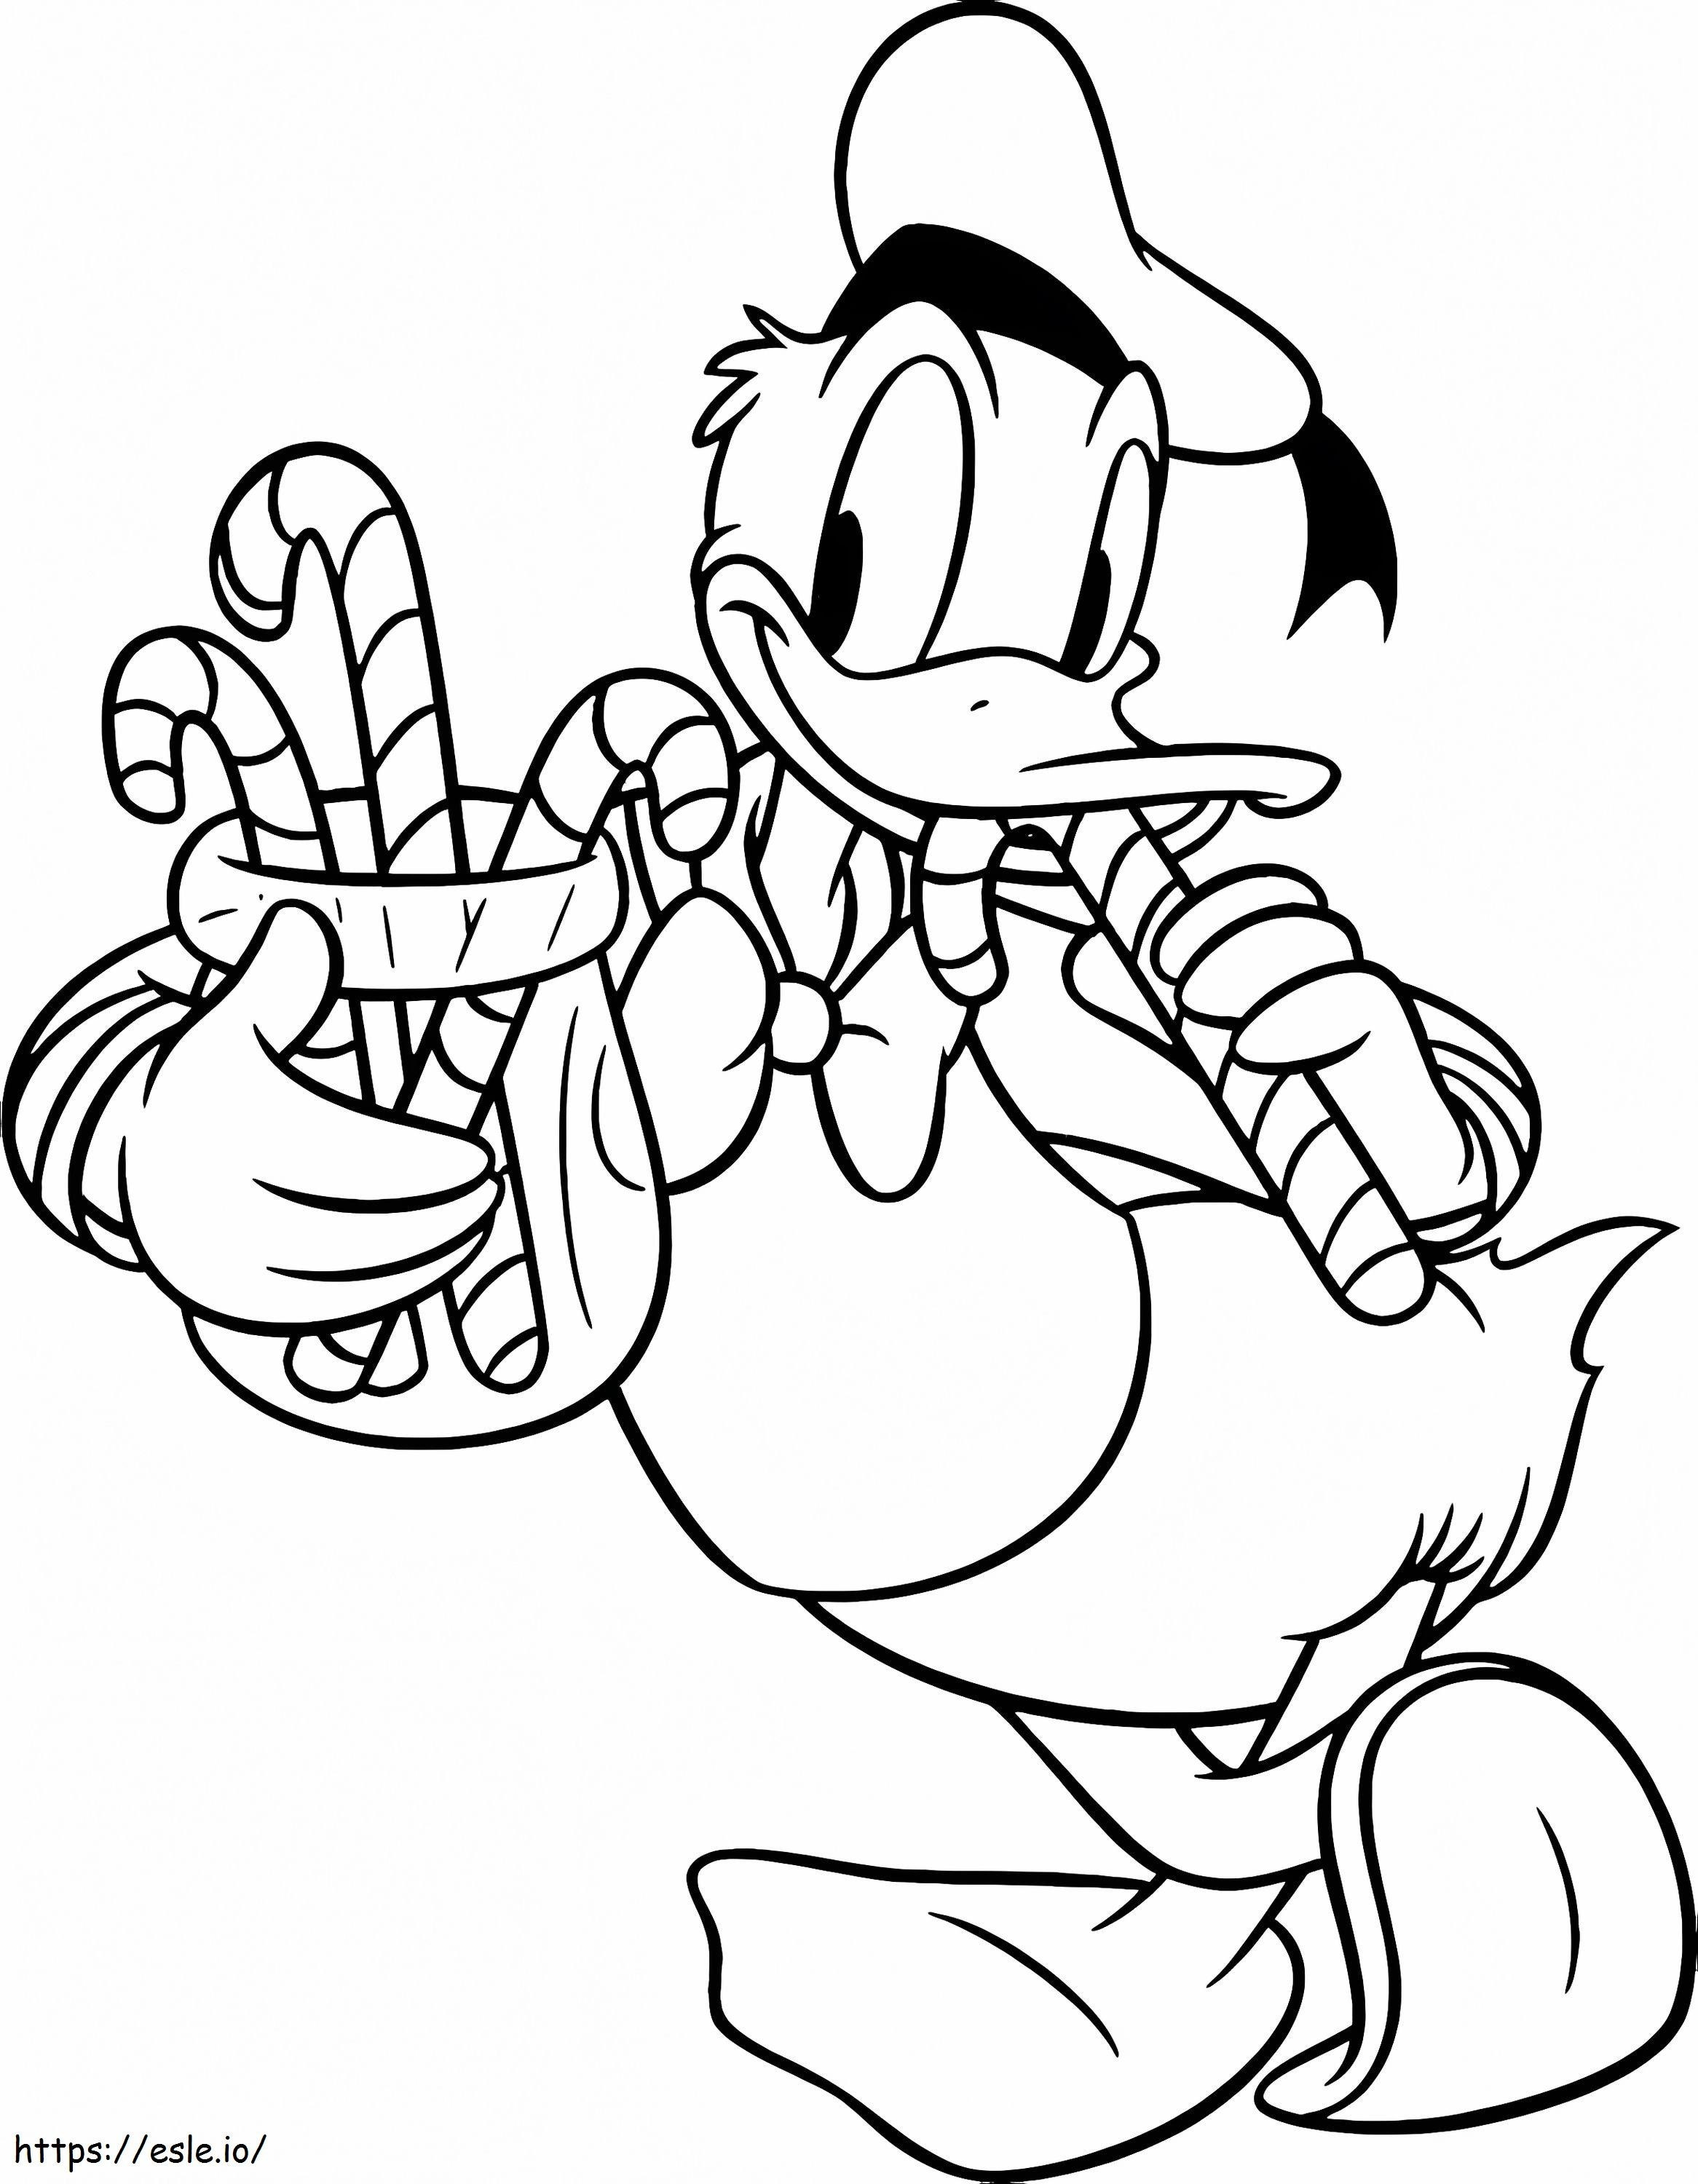 Donald Duck With Candy Canes coloring page